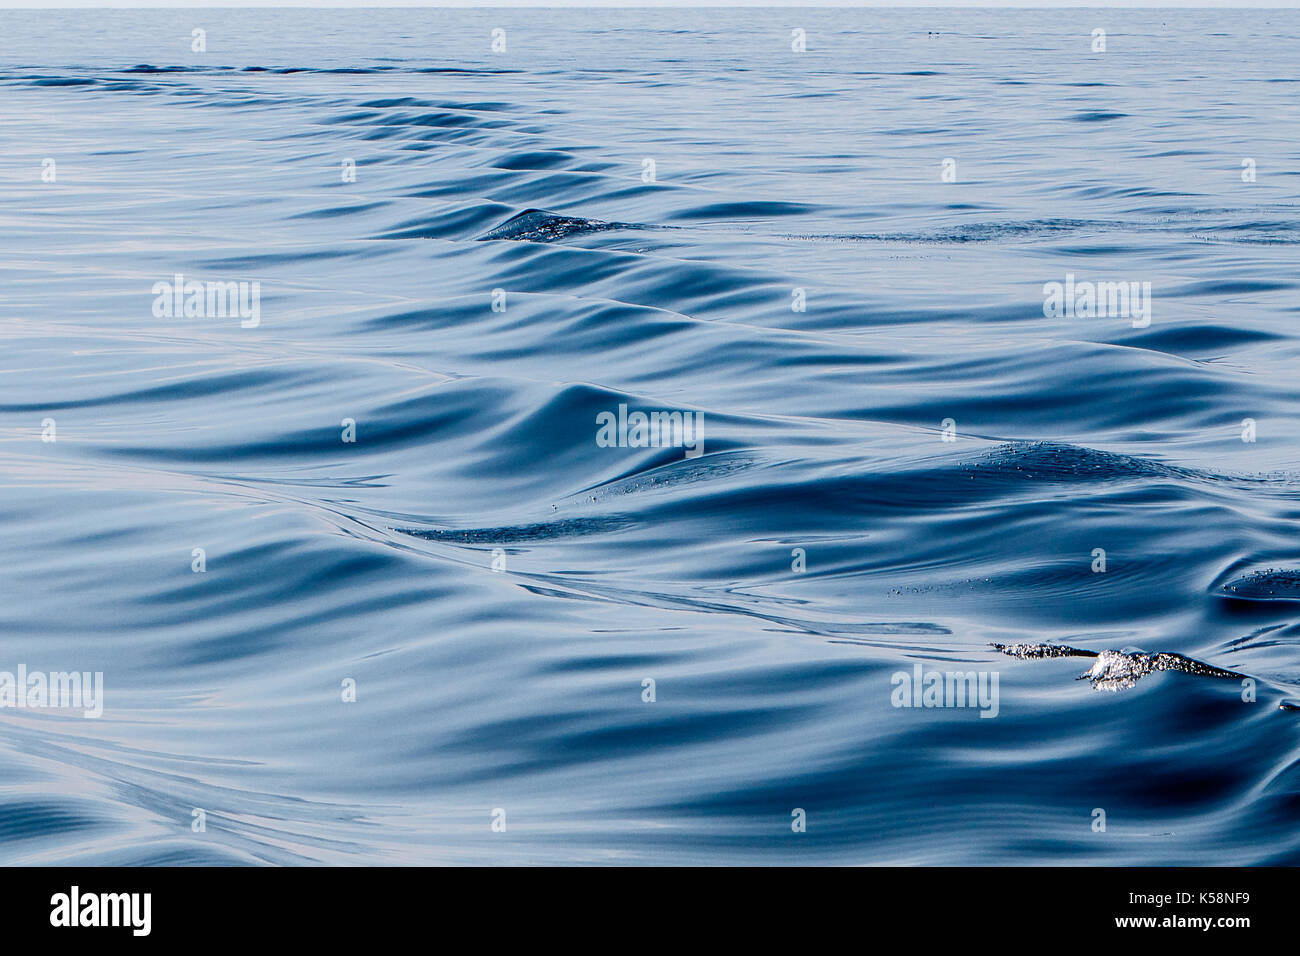 Boat wake on the ocean water surface. Stock Photo